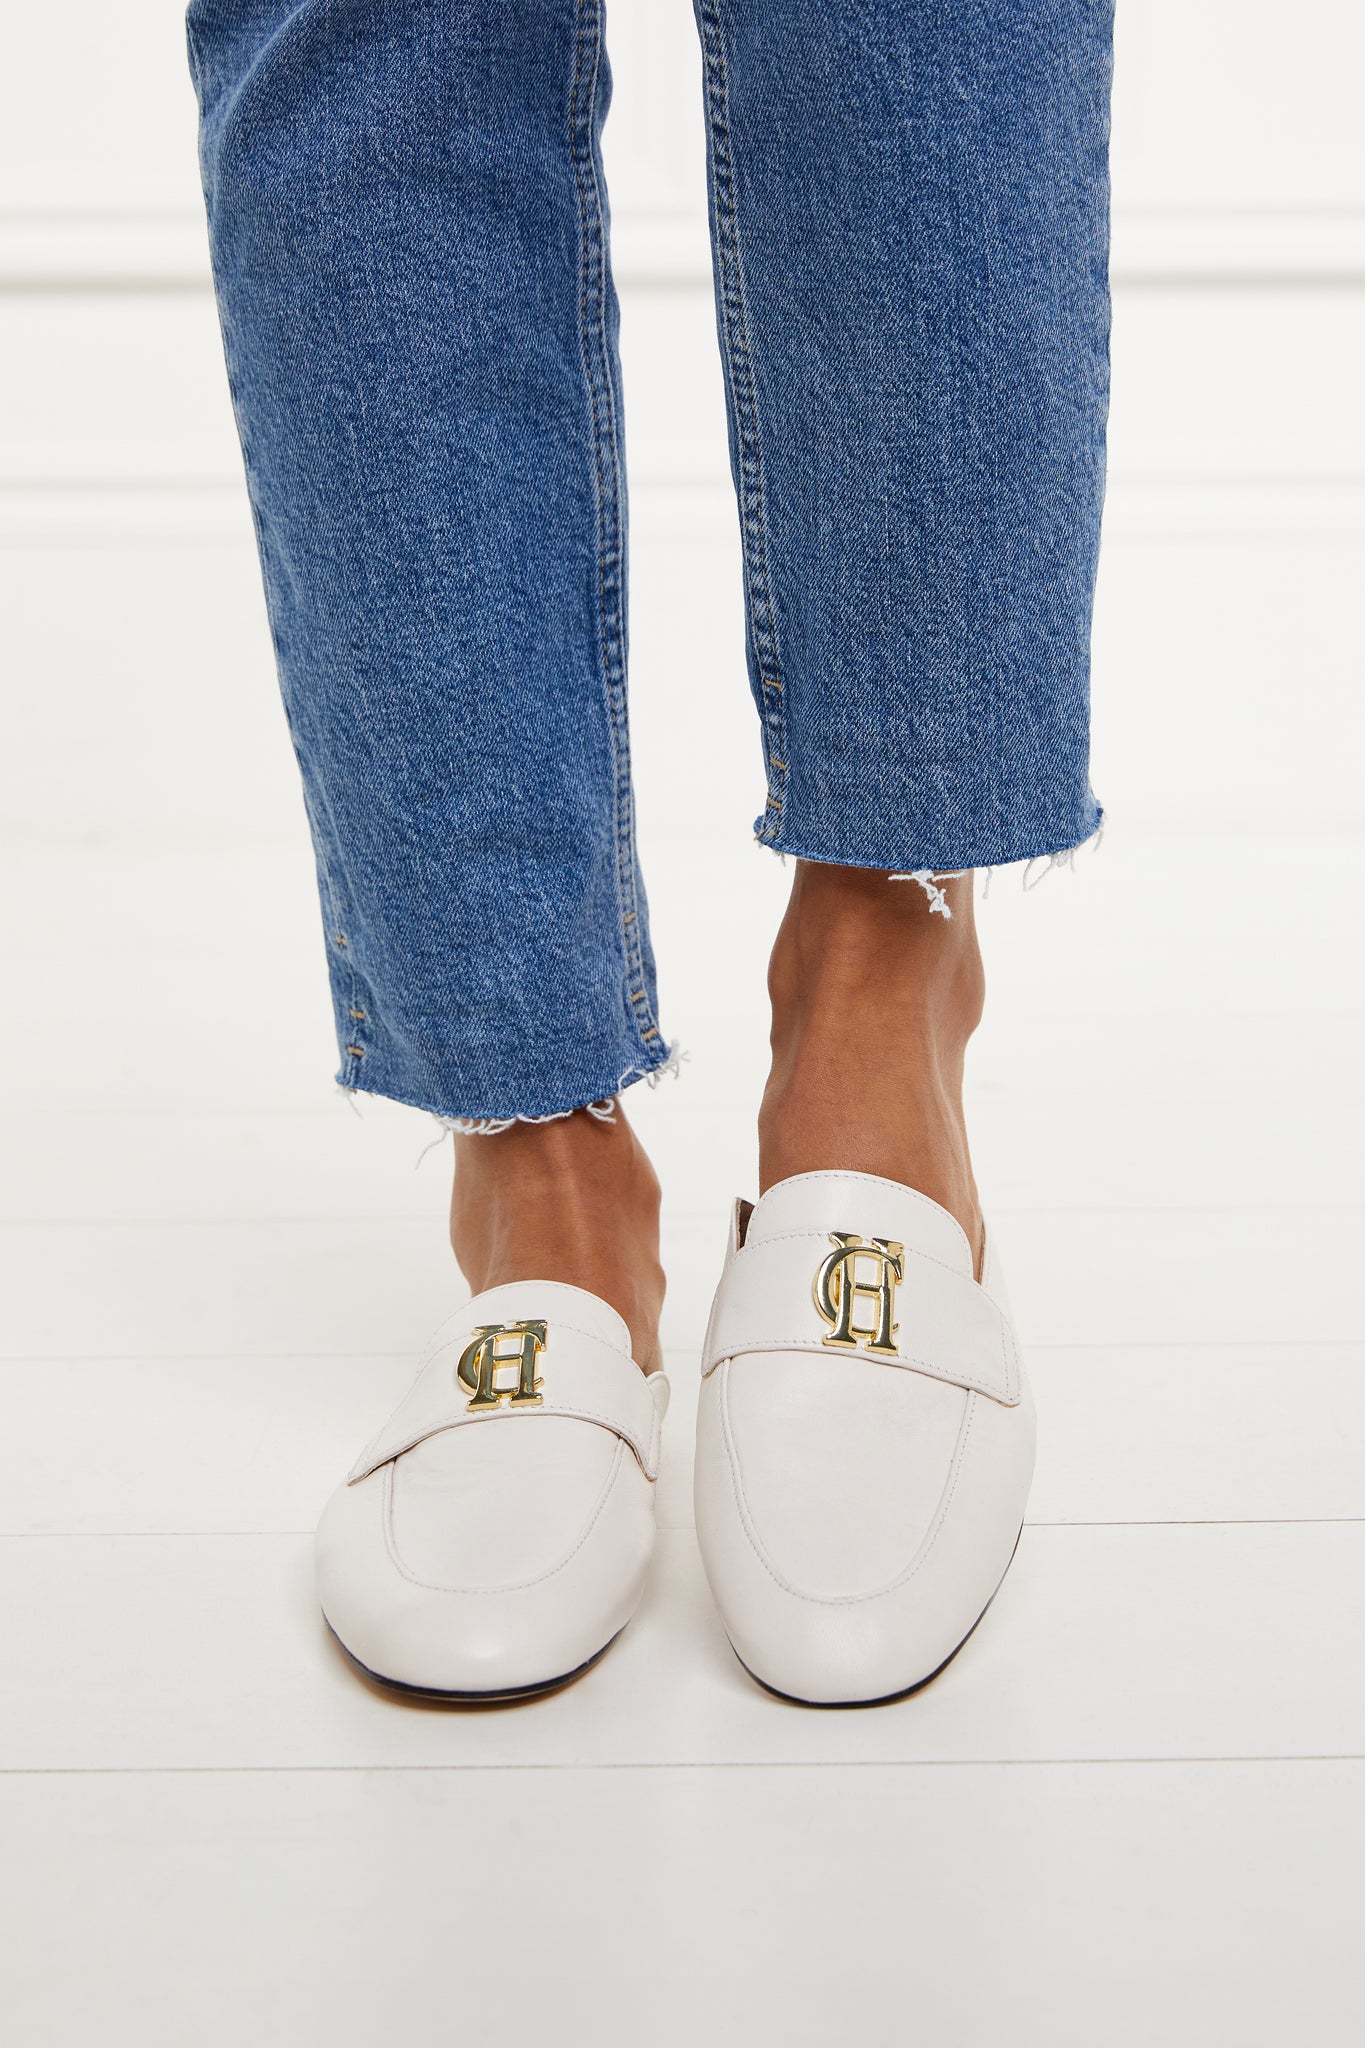 white leather backless loafers with a slightly pointed toe and gold hardware to the top worn with slim denim jeans with a frayed edge